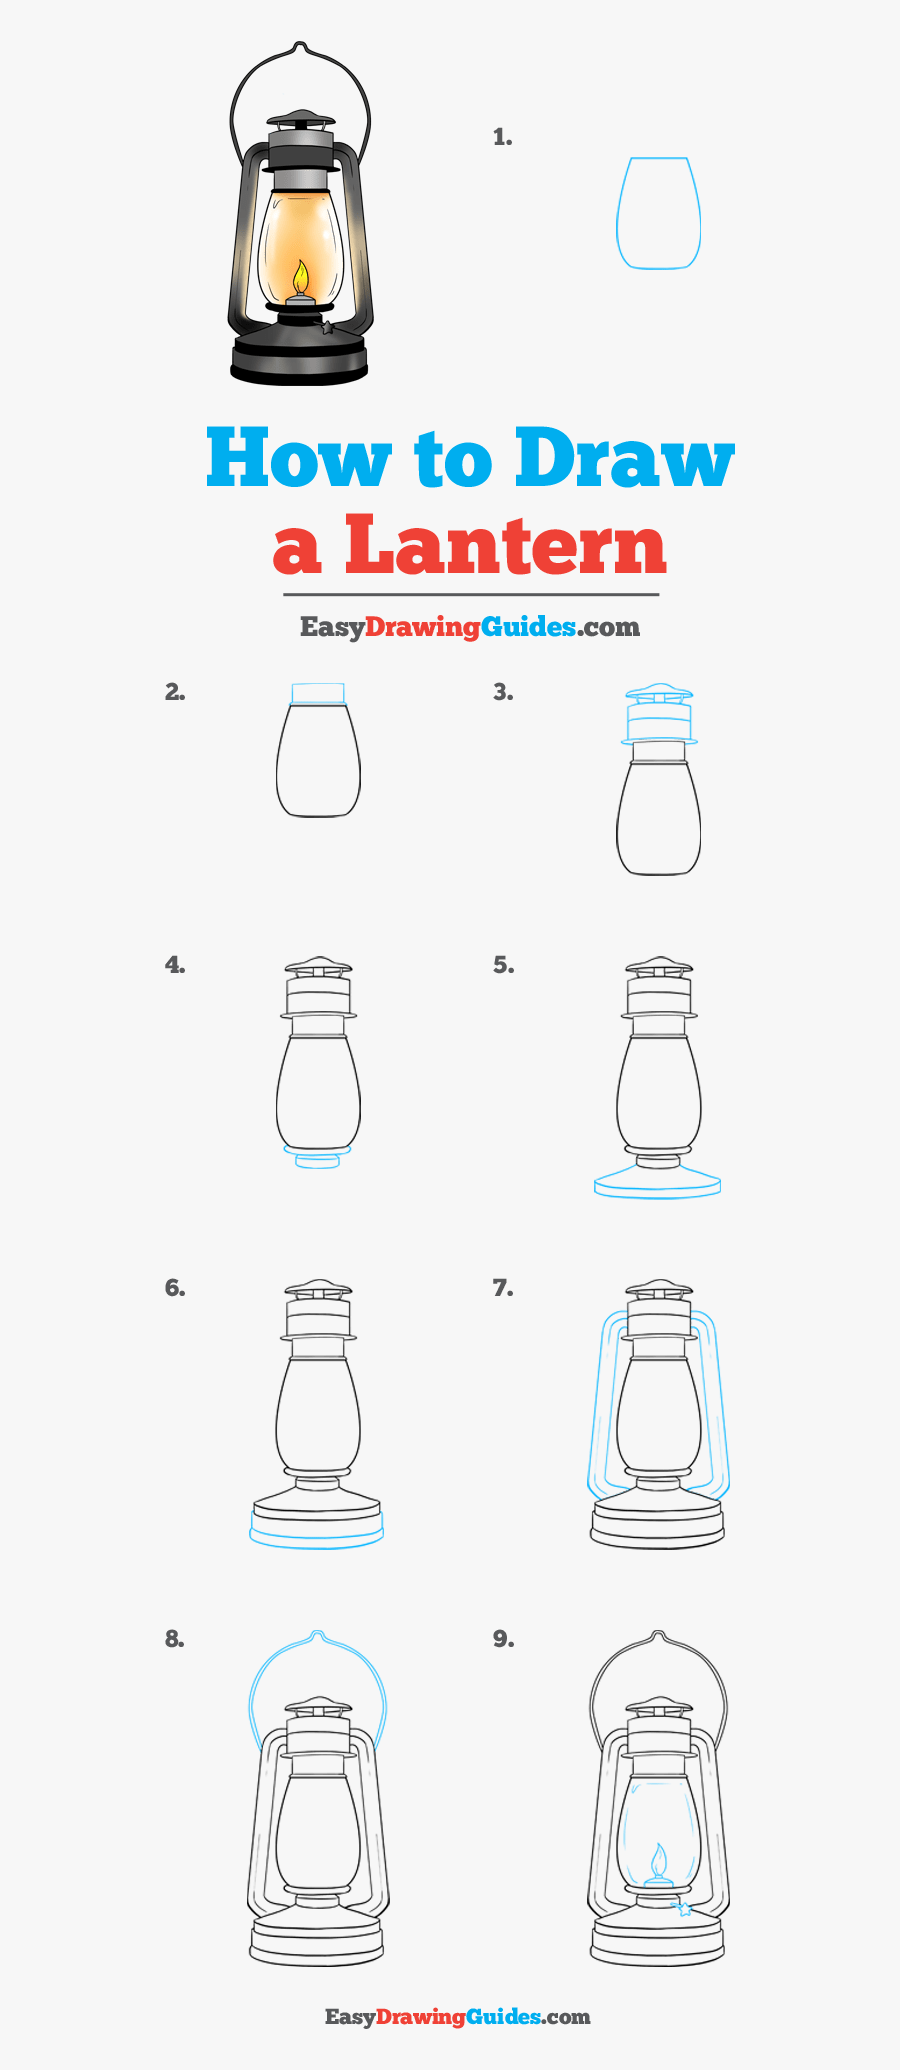 How To Draw A Lantern - Draw A Jet Easy, Transparent Clipart